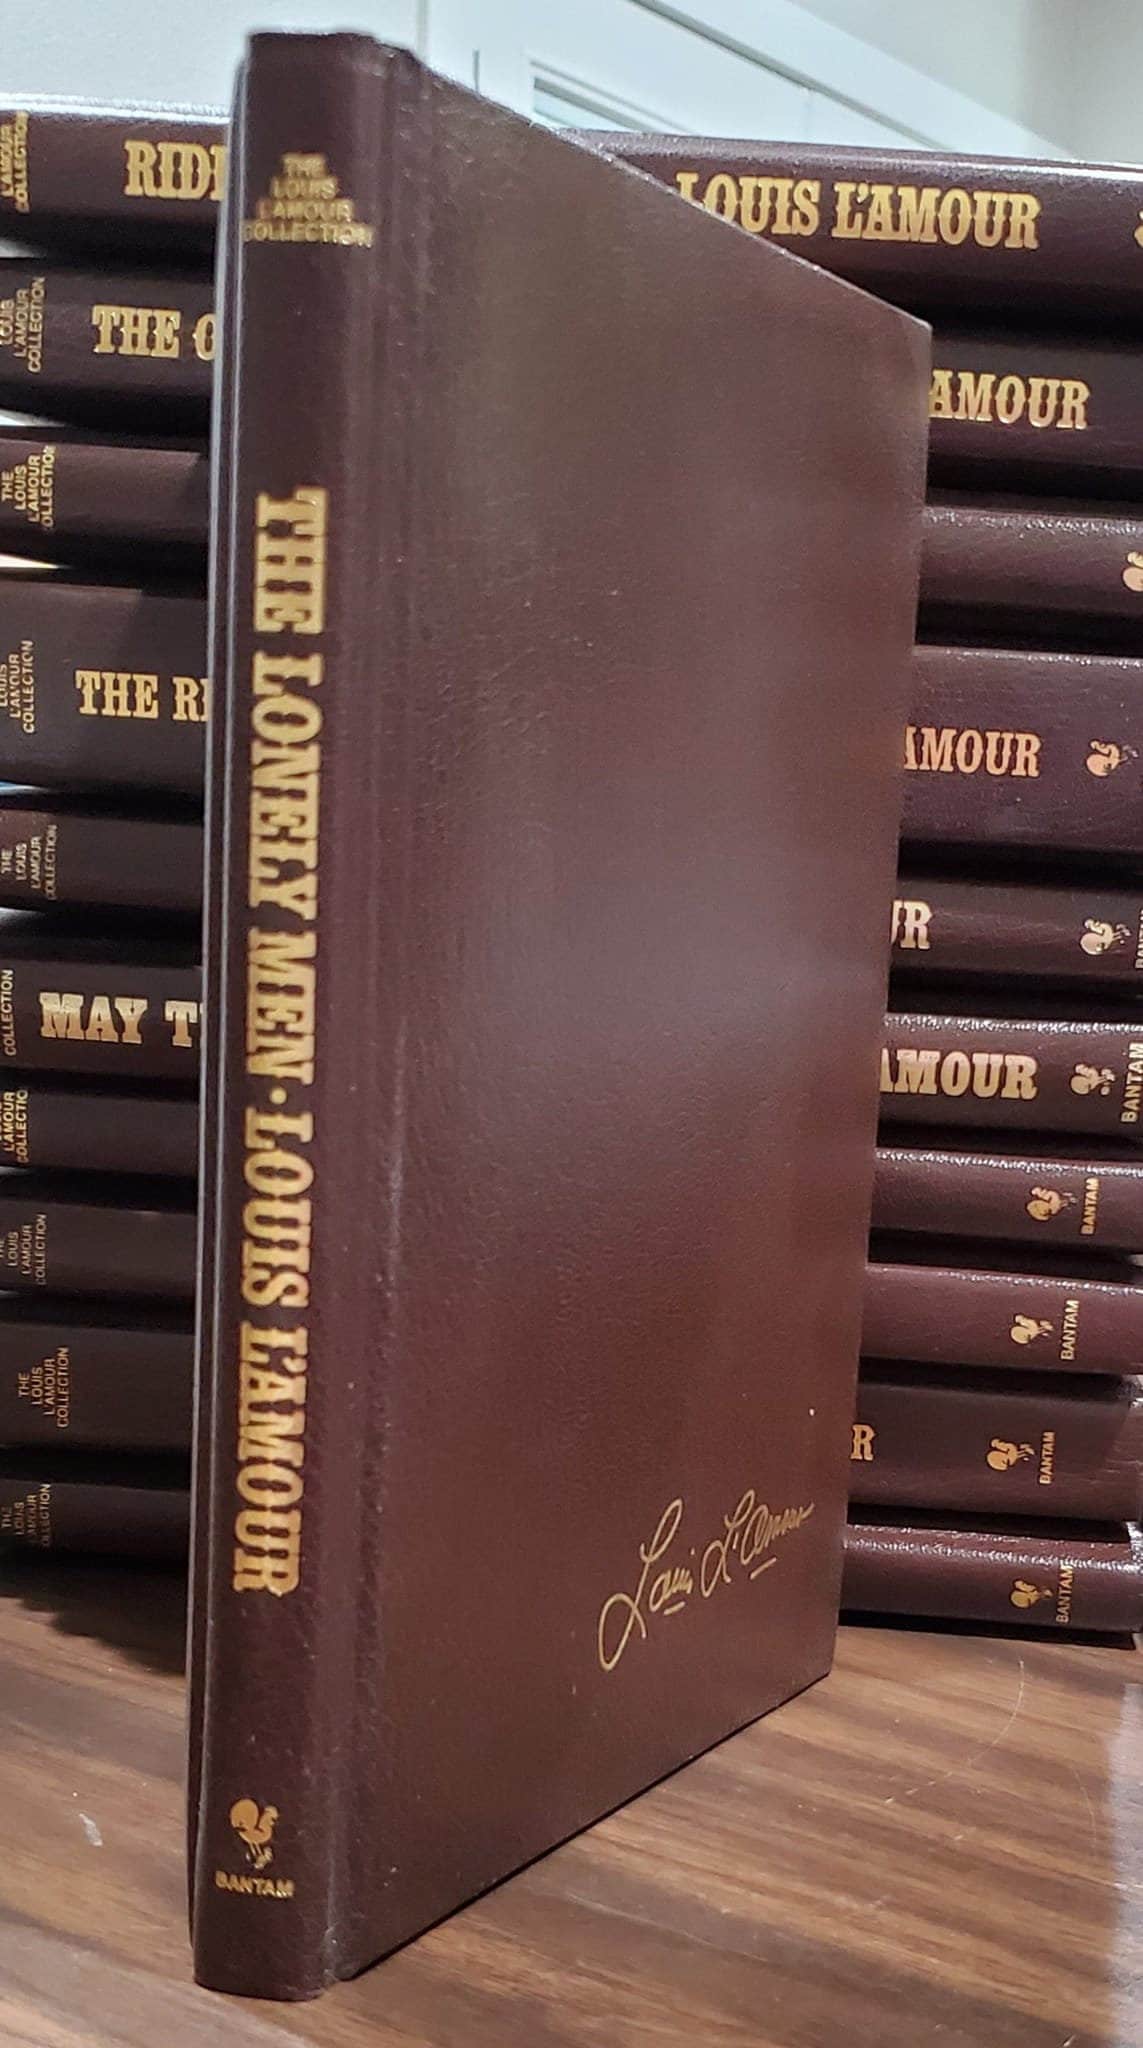 Louis L'Amour Collection - 11 books - Leatherette Hardcover books